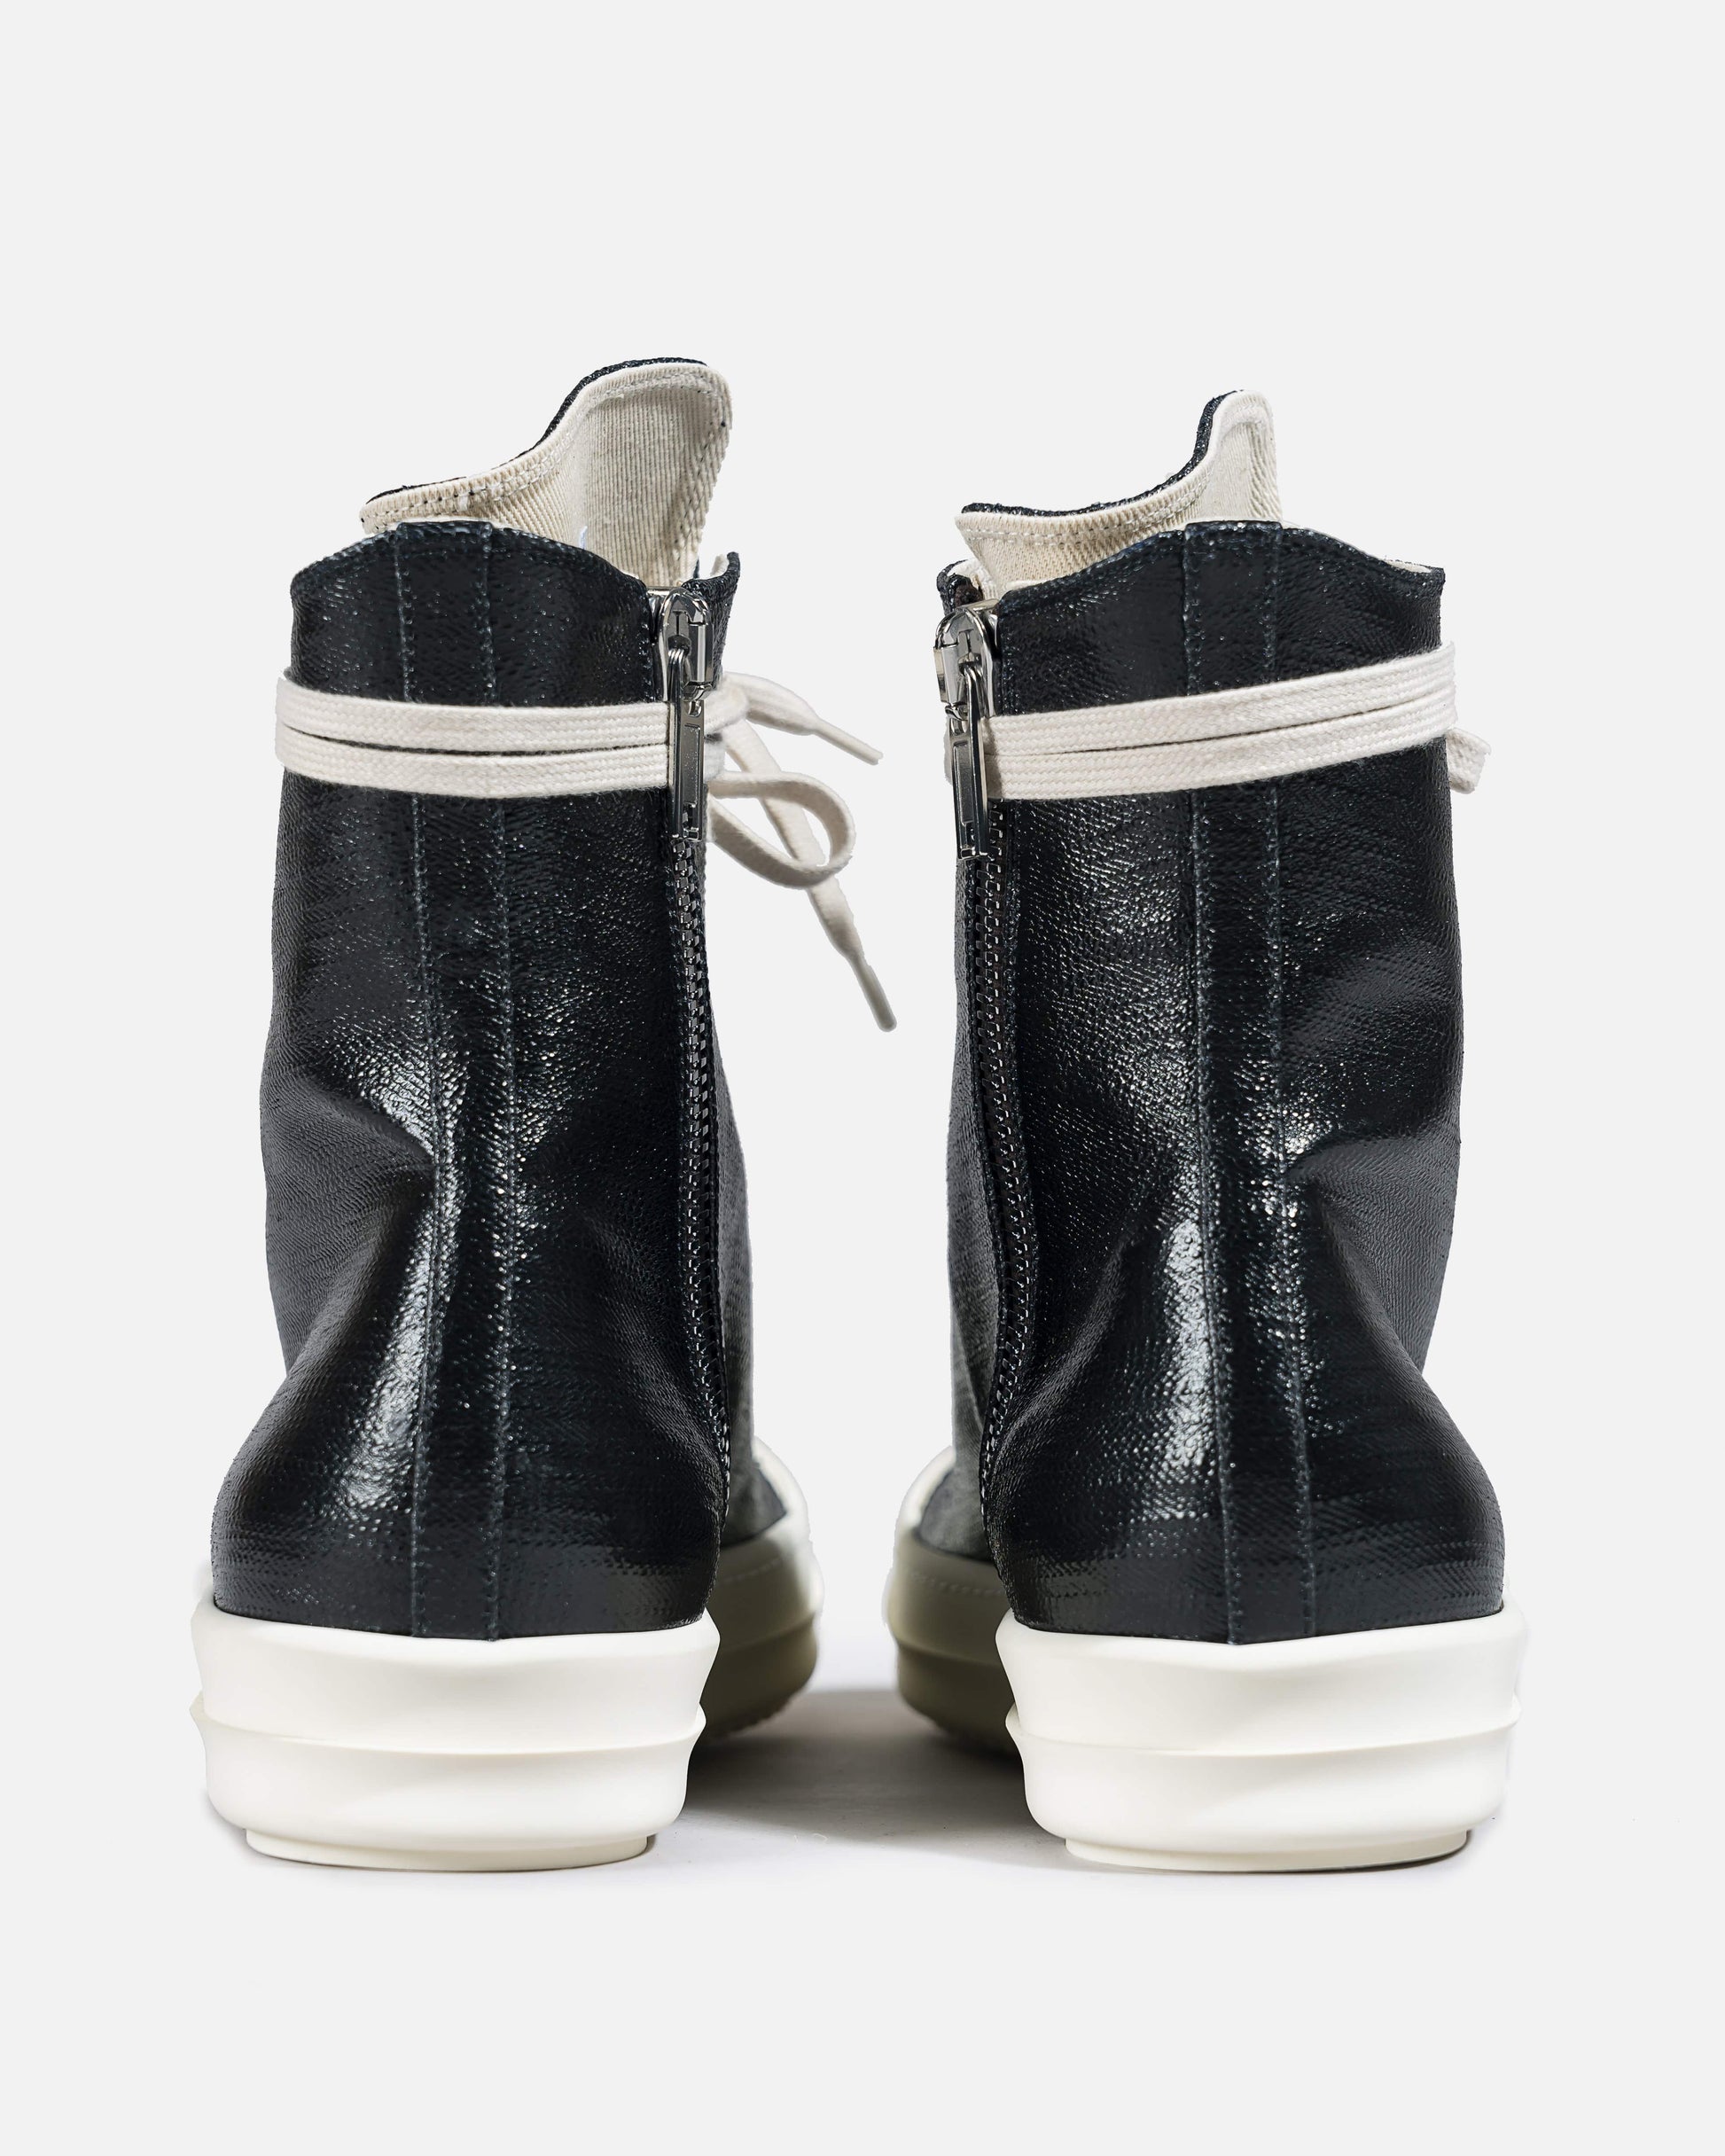 Rick Owens DRKSHDW Men's Shoes Lacquered High Top Ramones in Black